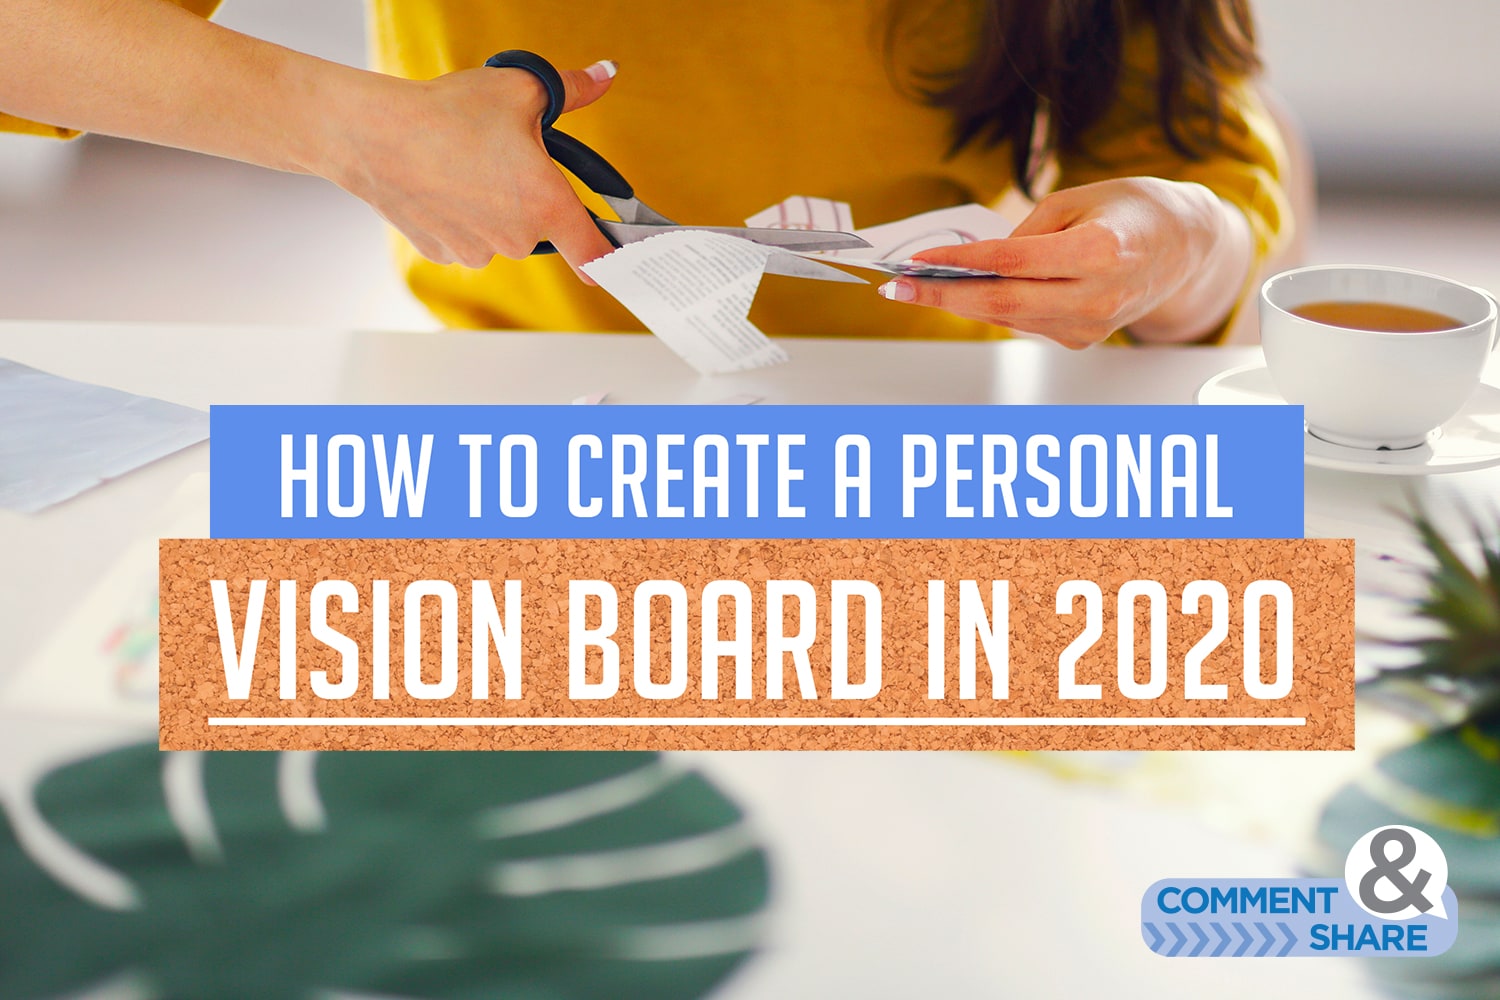 How to create a personal vision board for 2020